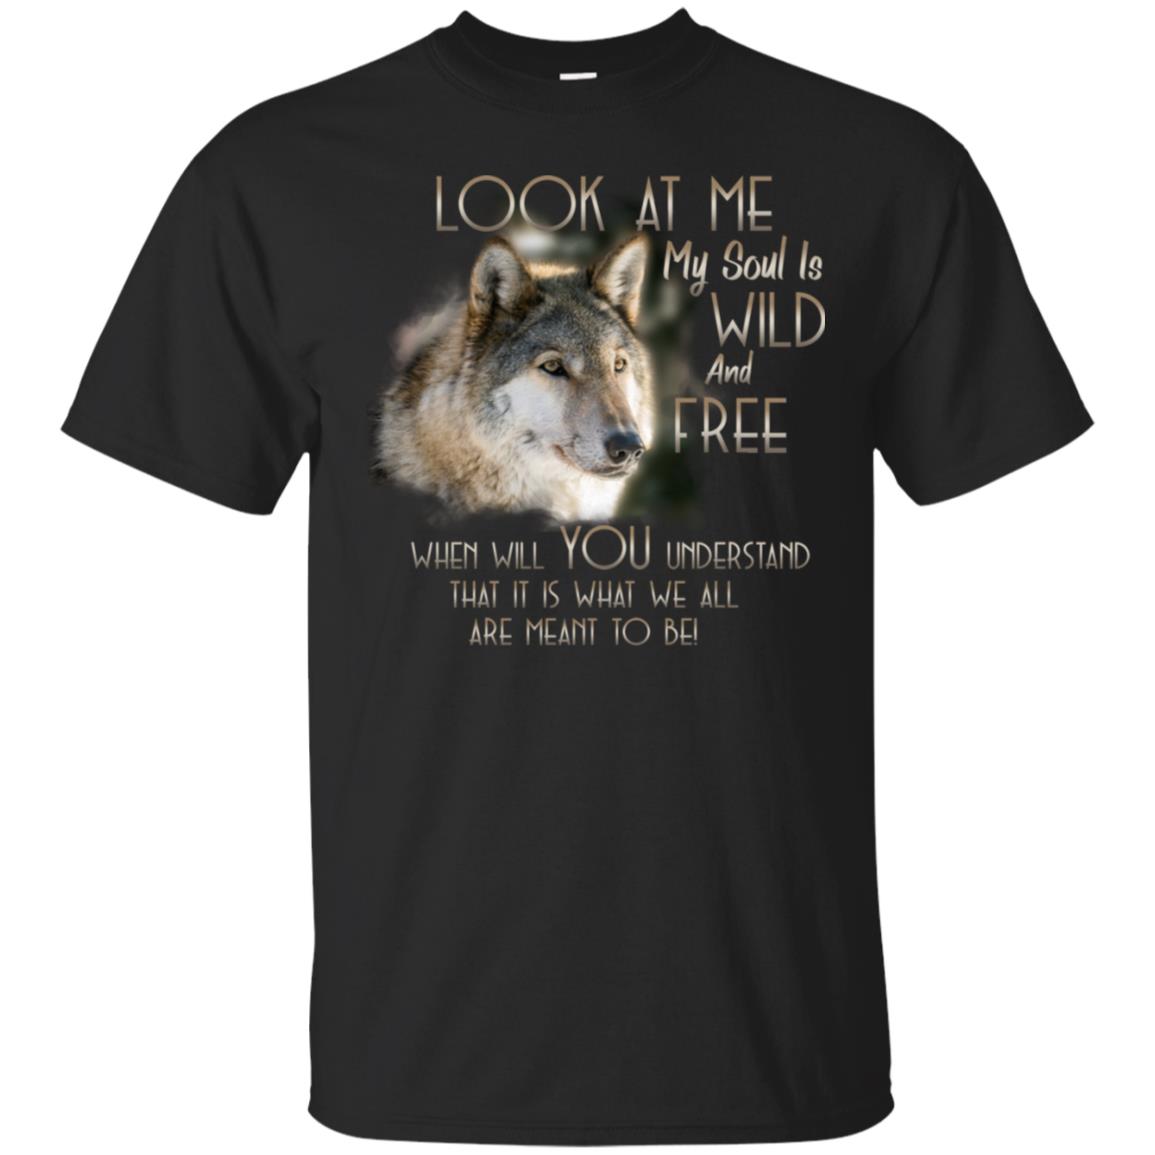 Look At Me My Soul Is Wild And Free When Will You Understand That It Is What We All Are Meant To BeG200 Gildan Ultra Cotton T-Shirt